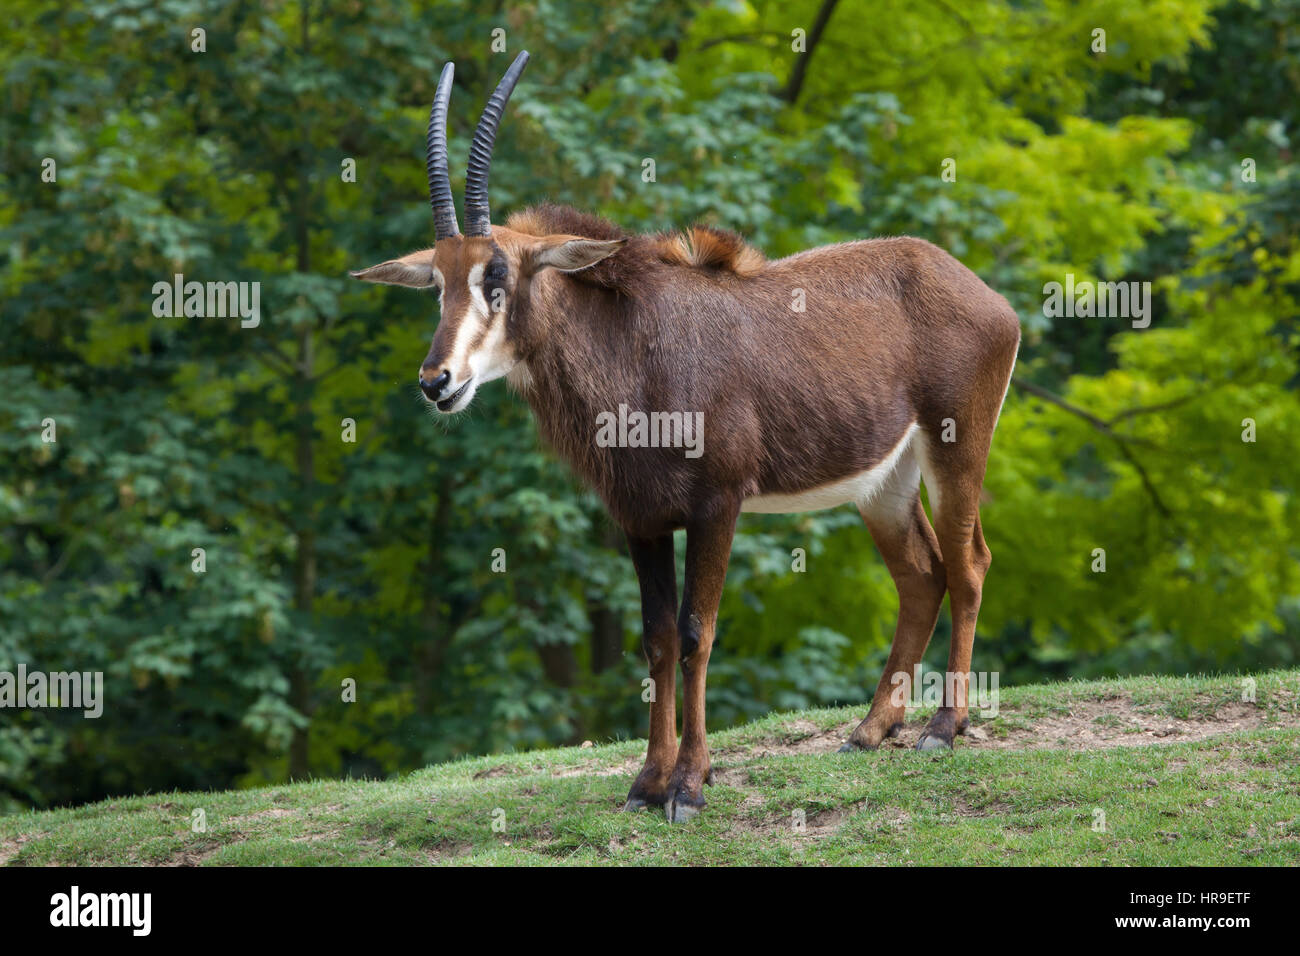 Sable antelope (Hippotragus niger), also known as the black antelope. Stock Photo